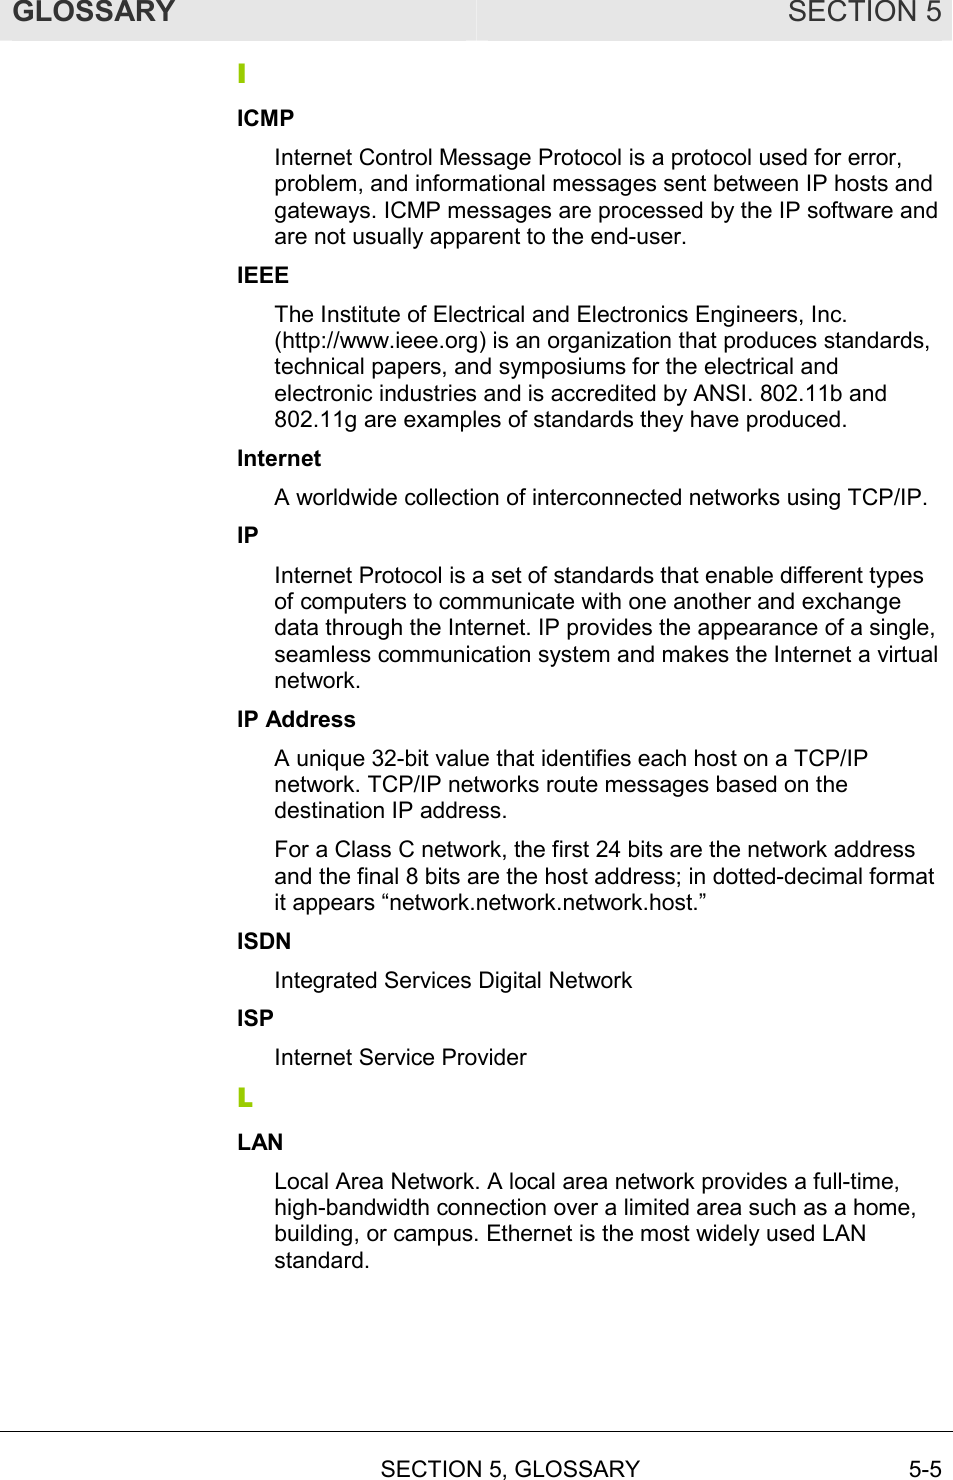 GLOSSARY SECTION 5  SECTION 5, GLOSSARY 5-5 I ICMP Internet Control Message Protocol is a protocol used for error, problem, and informational messages sent between IP hosts and gateways. ICMP messages are processed by the IP software and are not usually apparent to the end-user. IEEE The Institute of Electrical and Electronics Engineers, Inc. (http://www.ieee.org) is an organization that produces standards, technical papers, and symposiums for the electrical and electronic industries and is accredited by ANSI. 802.11b and 802.11g are examples of standards they have produced. Internet A worldwide collection of interconnected networks using TCP/IP. IP Internet Protocol is a set of standards that enable different types of computers to communicate with one another and exchange data through the Internet. IP provides the appearance of a single, seamless communication system and makes the Internet a virtual network. IP Address A unique 32-bit value that identifies each host on a TCP/IP network. TCP/IP networks route messages based on the destination IP address.  For a Class C network, the first 24 bits are the network address and the final 8 bits are the host address; in dotted-decimal format it appears “network.network.network.host.” ISDN Integrated Services Digital Network ISP Internet Service Provider L LAN Local Area Network. A local area network provides a full-time, high-bandwidth connection over a limited area such as a home, building, or campus. Ethernet is the most widely used LAN standard. 